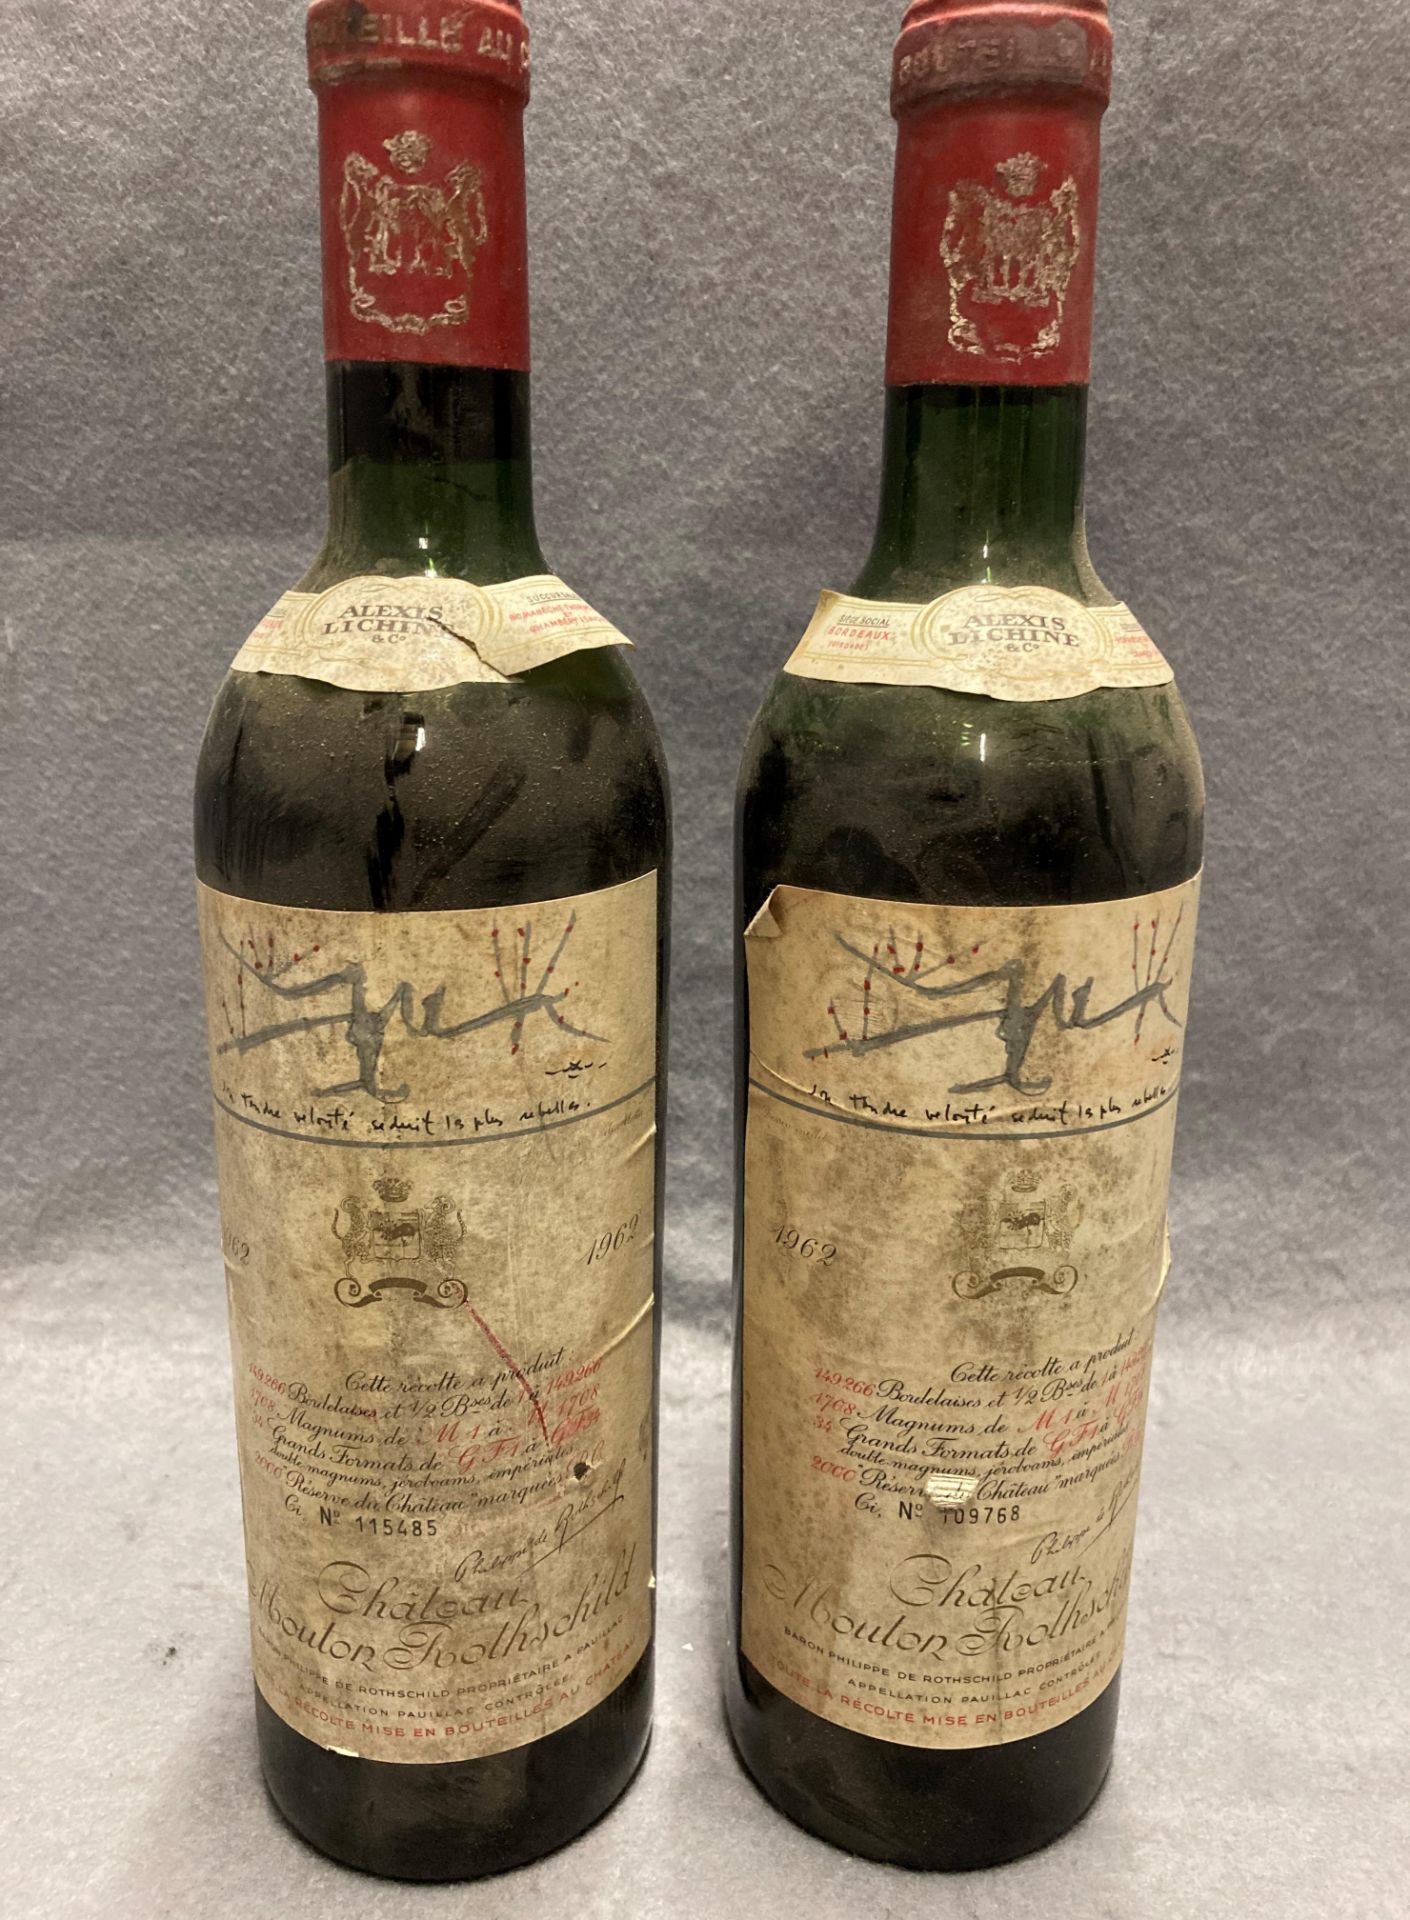 Two 75cl bottles of 1962 Chateau Mouton Rothschild No 115485 and 109768 - advised stored cellared